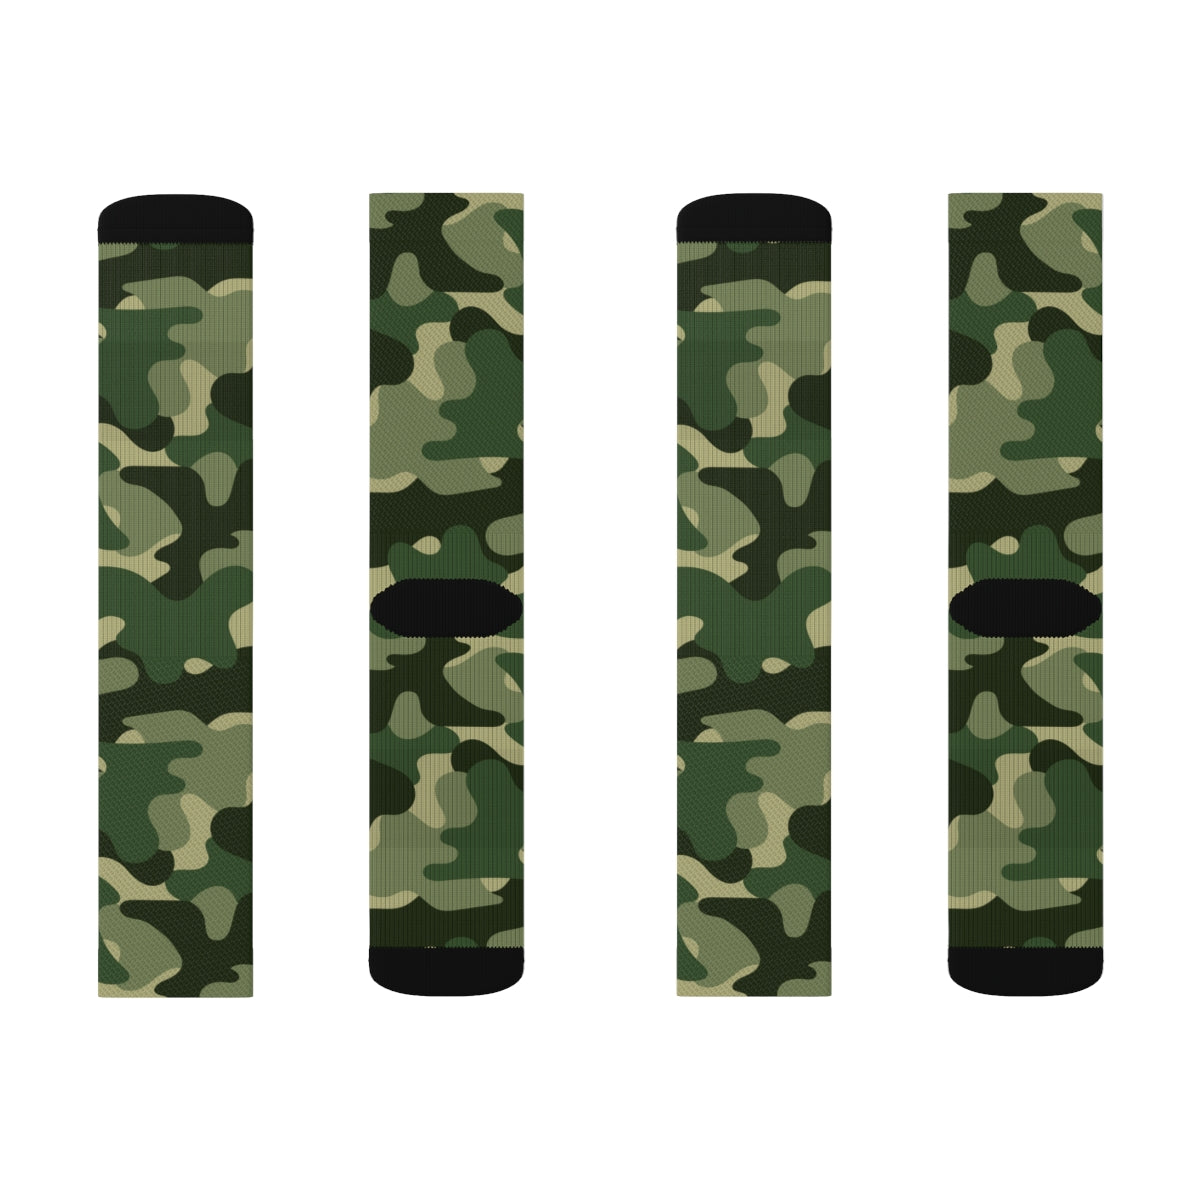 Camouflage Socks, Camo Army Green 3D Sublimation Socks Women Men Funny Fun Novelty Cool Funky Crazy Casual Cute Crew Unique Gift Starcove Fashion